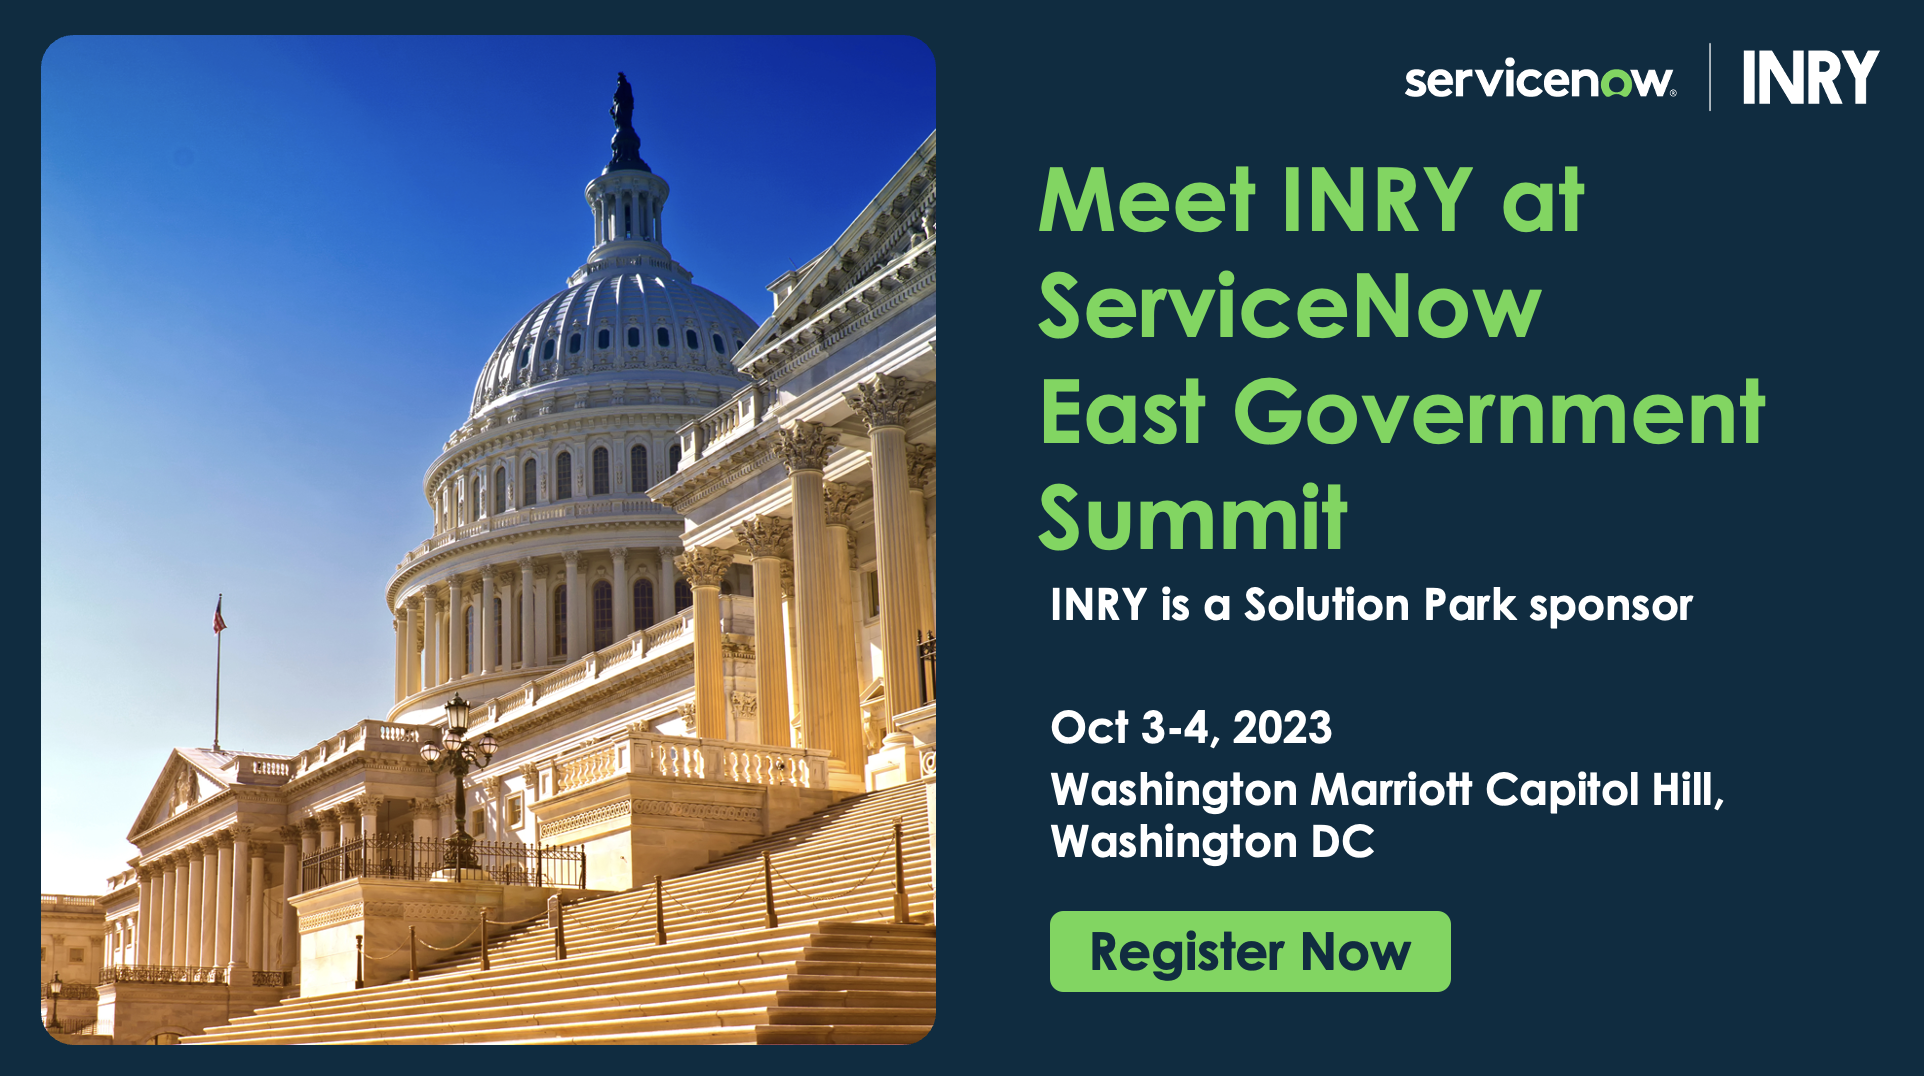 Meet INRY at ServiceNow East Government Summit